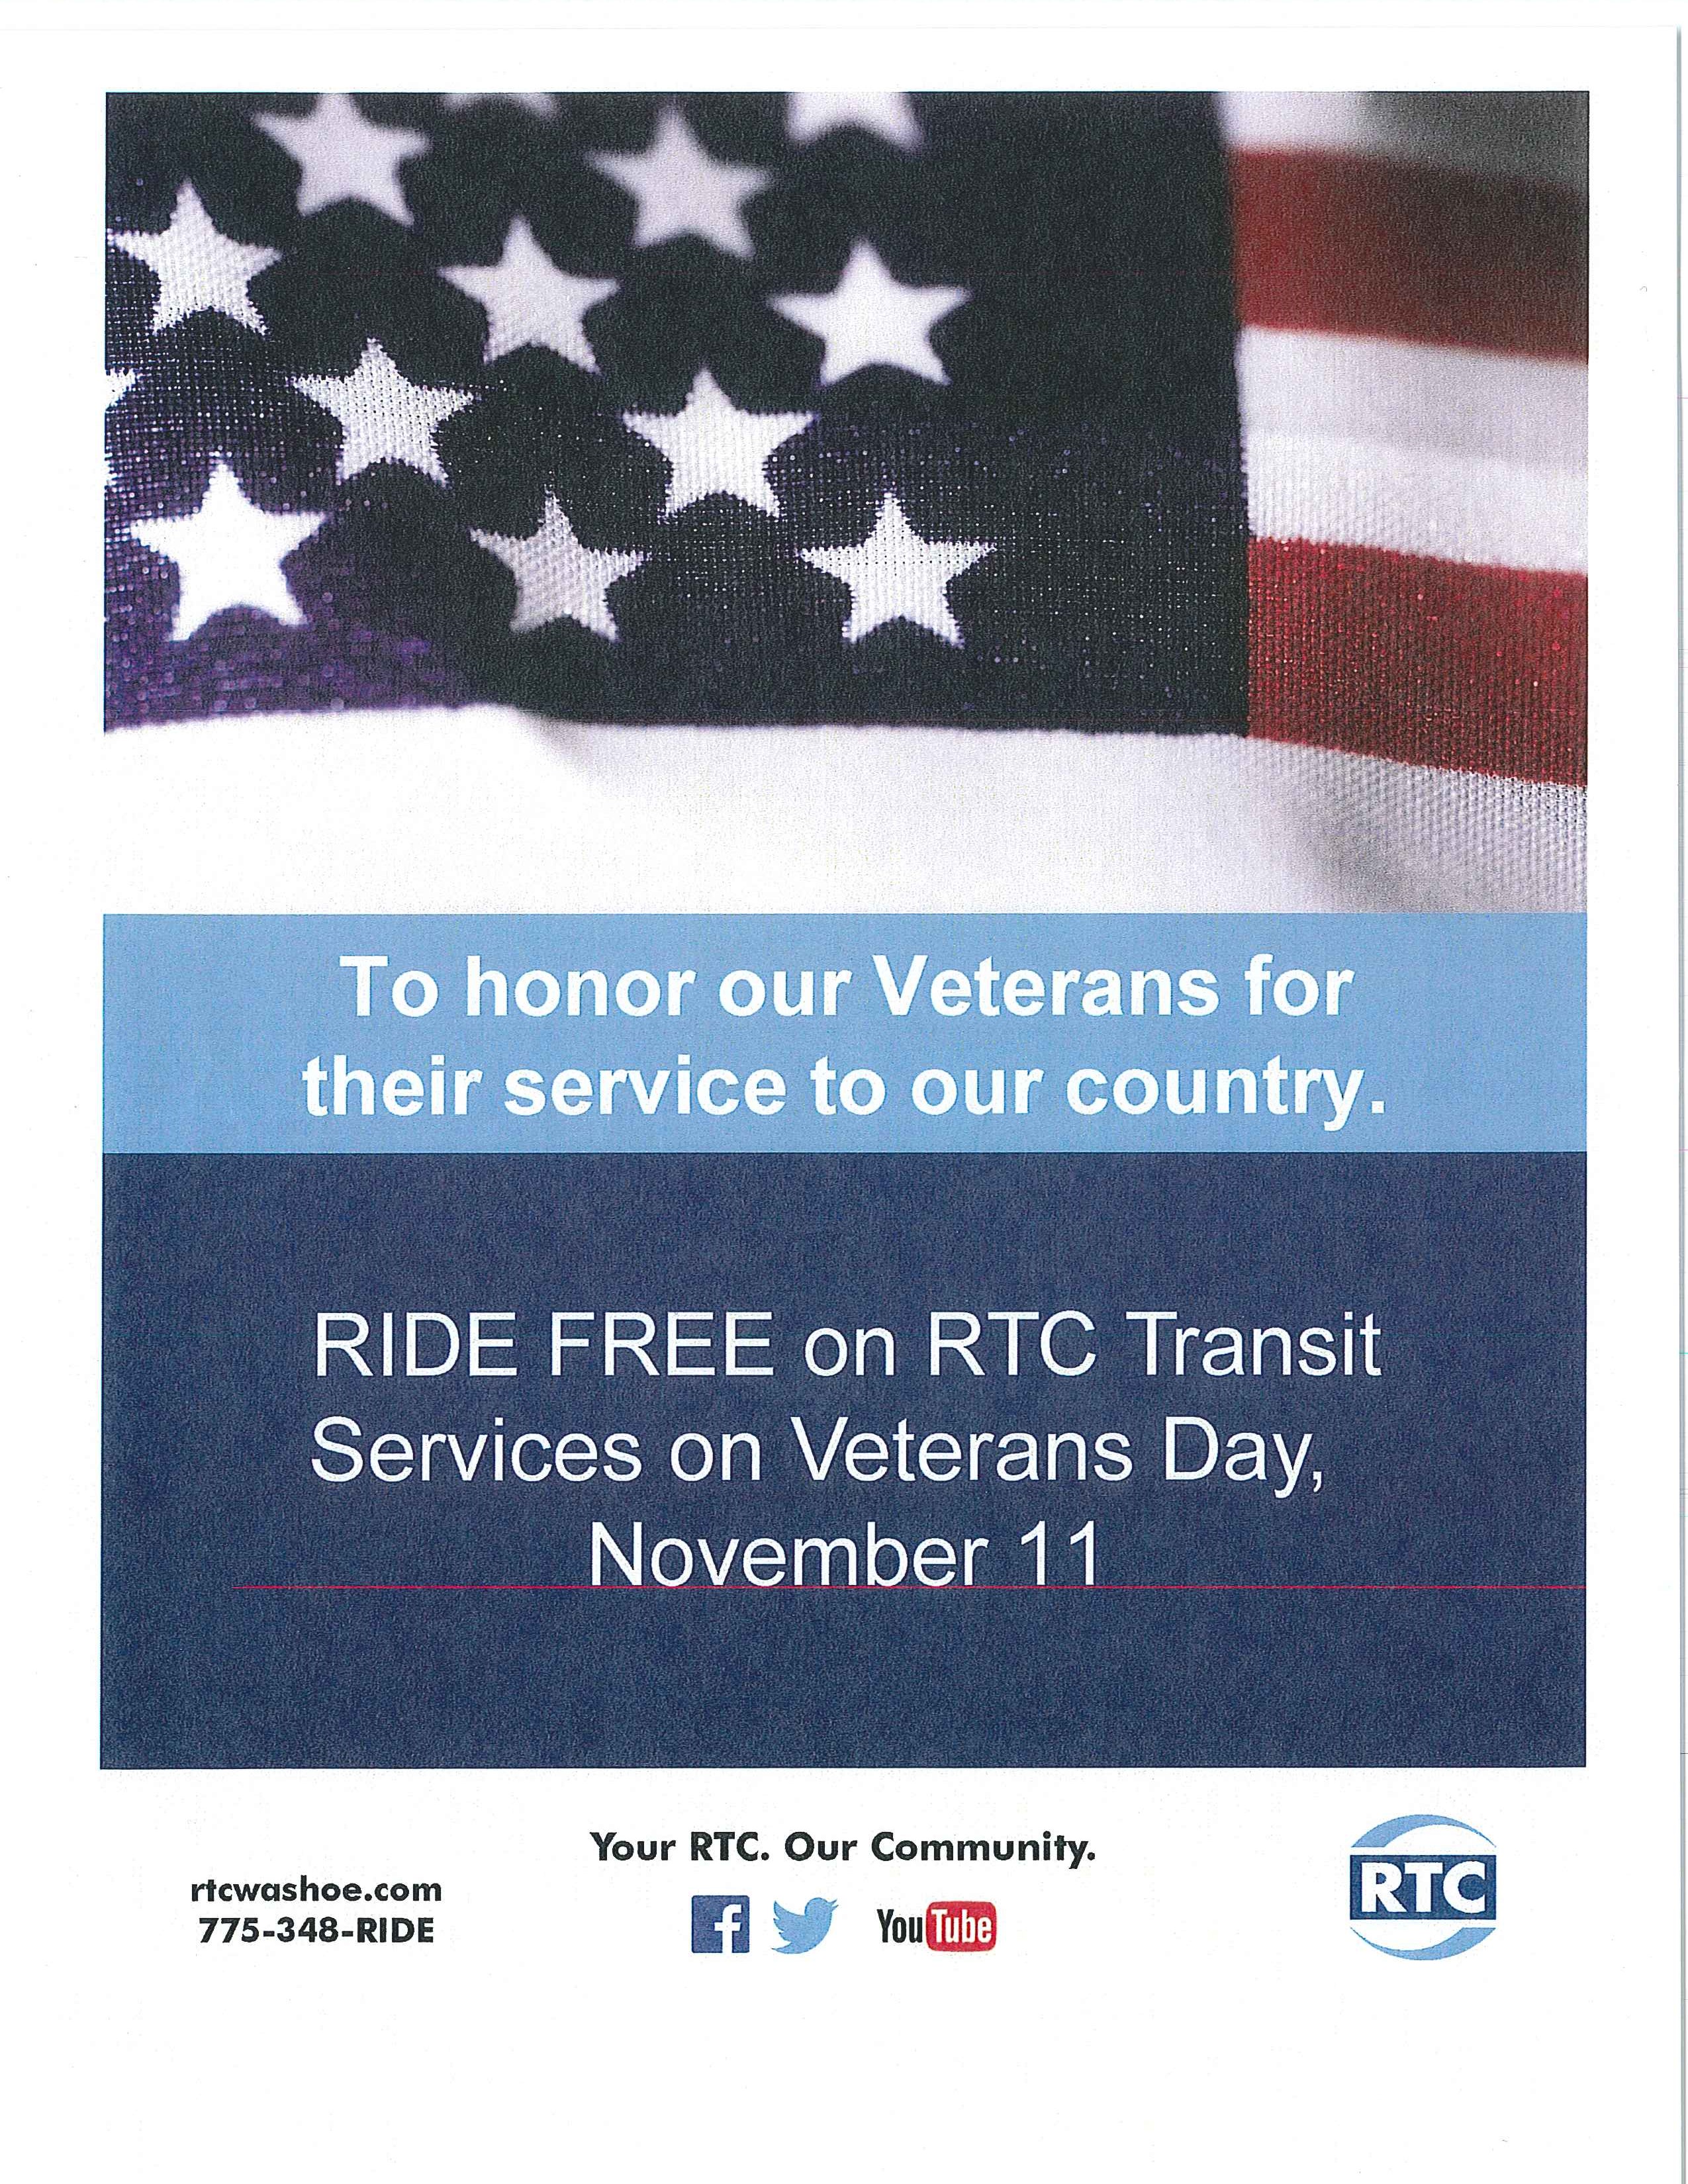 Ride RTC for Free on Veterans Day